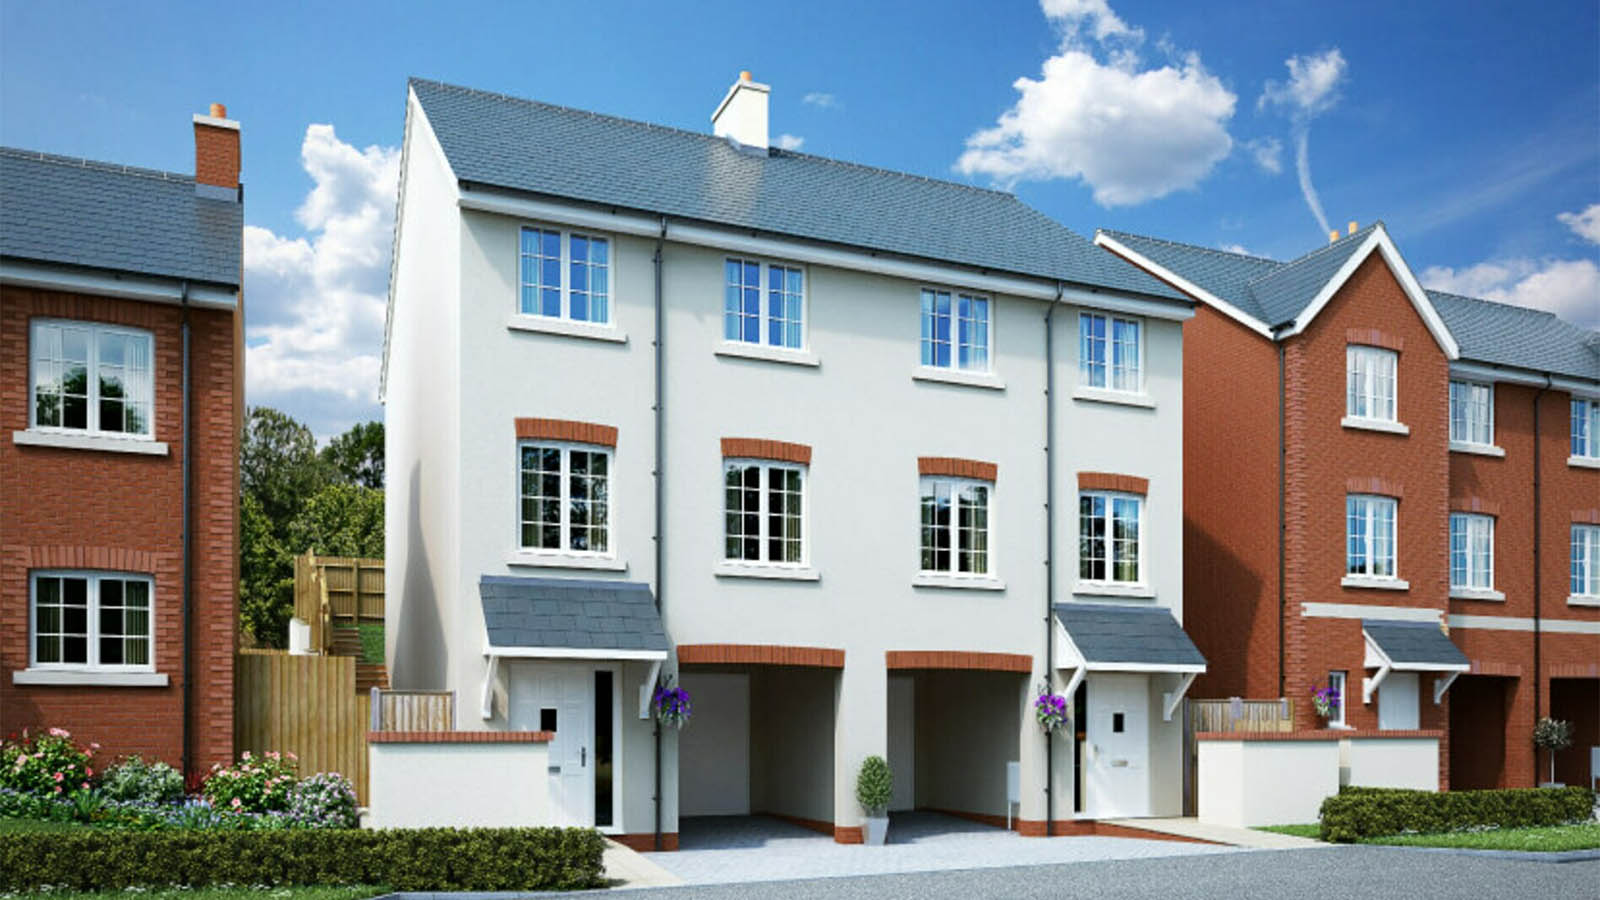 The ‘Singer’ house type at Market Place (Cavanna Homes)